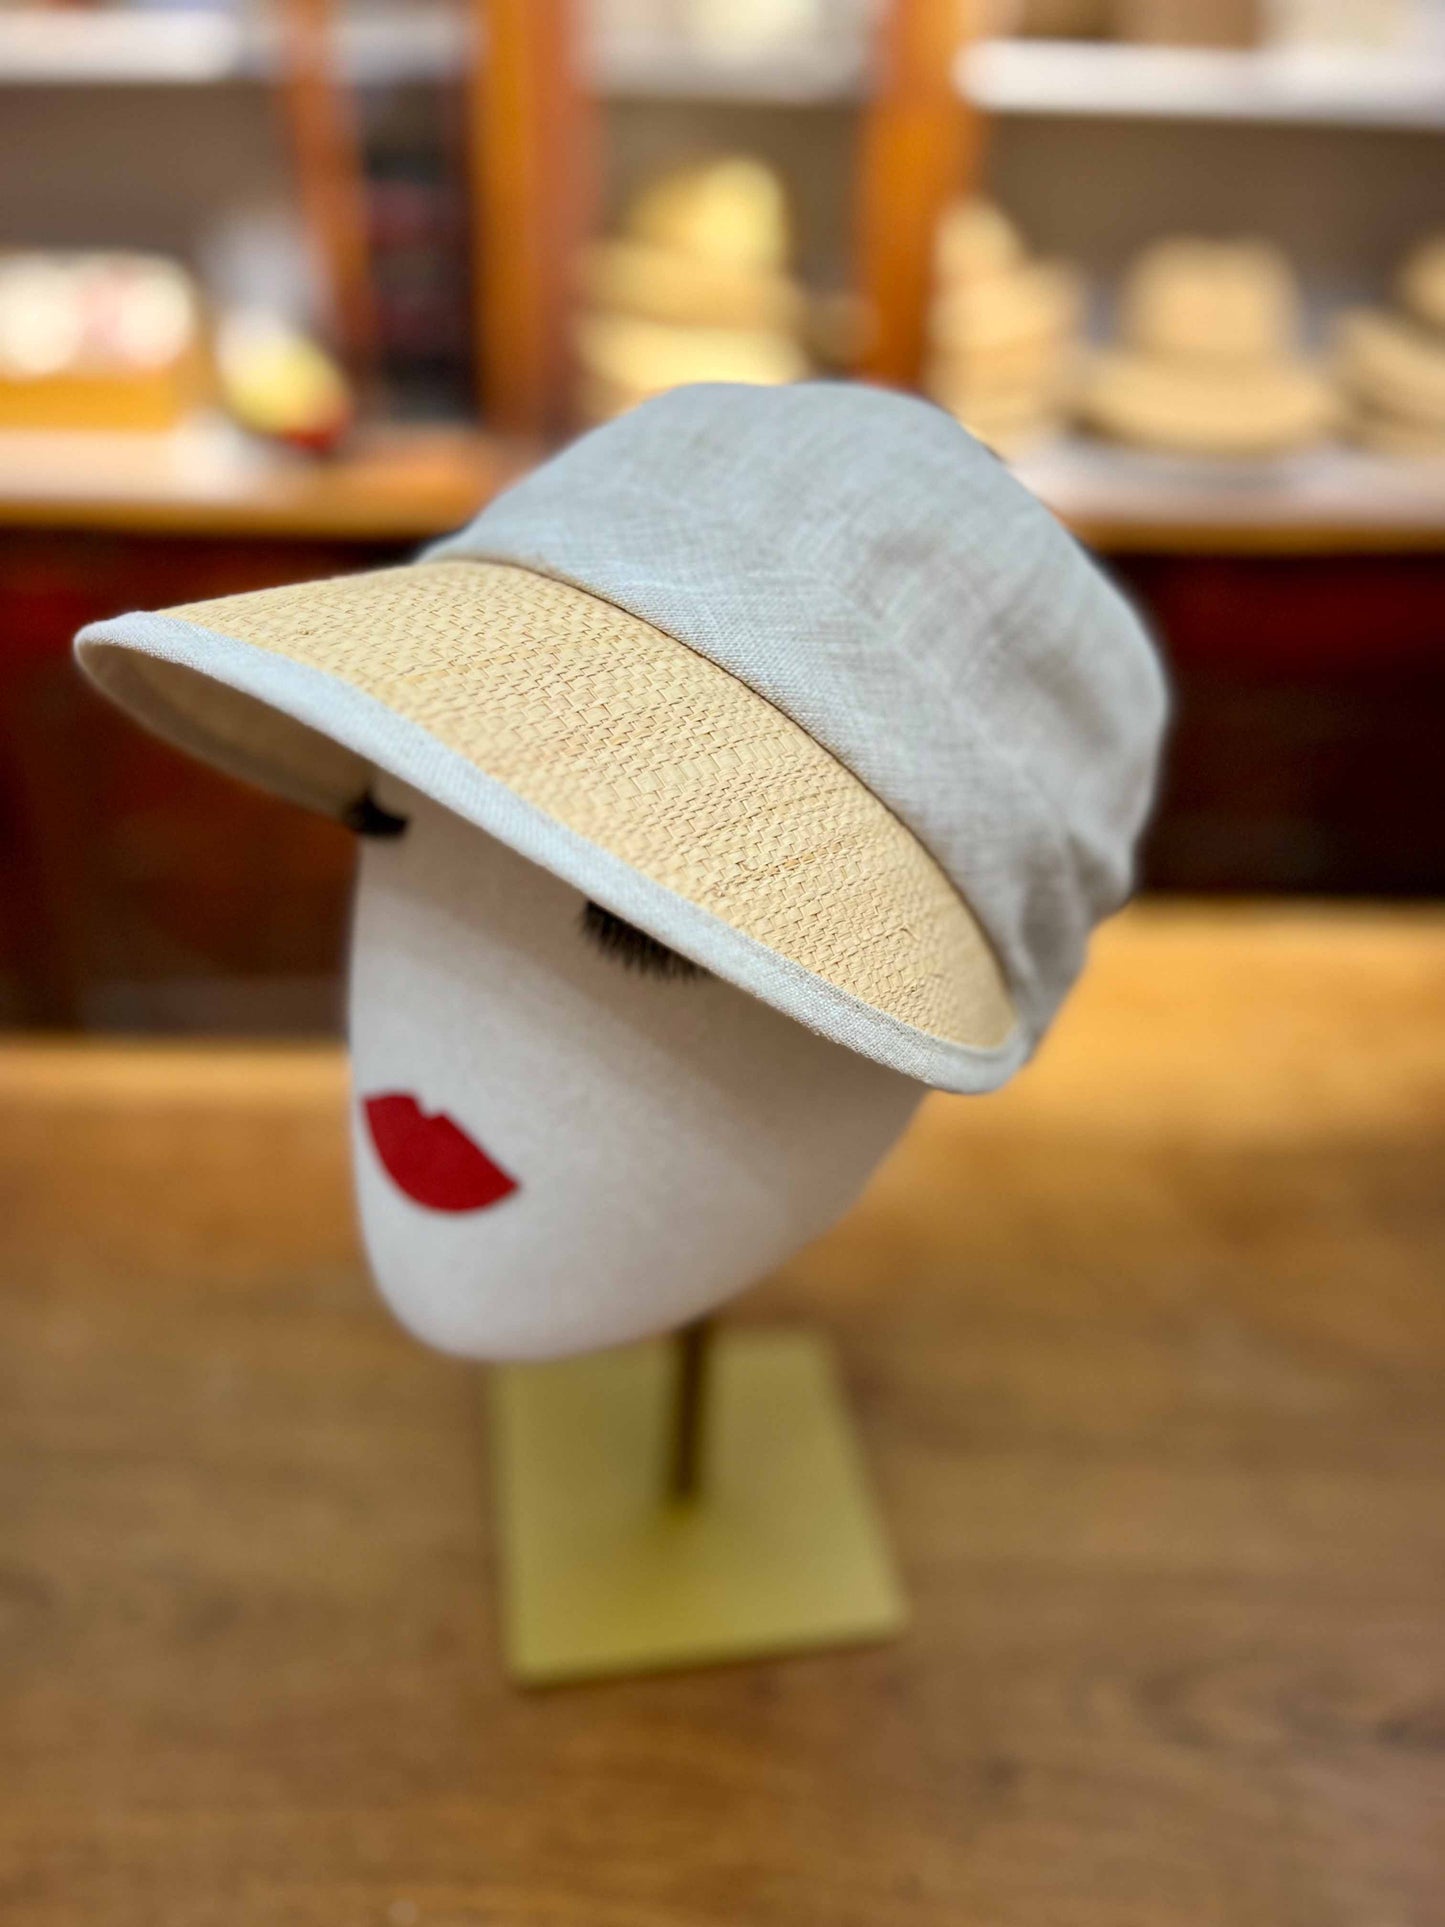 Mature Woman Hat With Visor Has